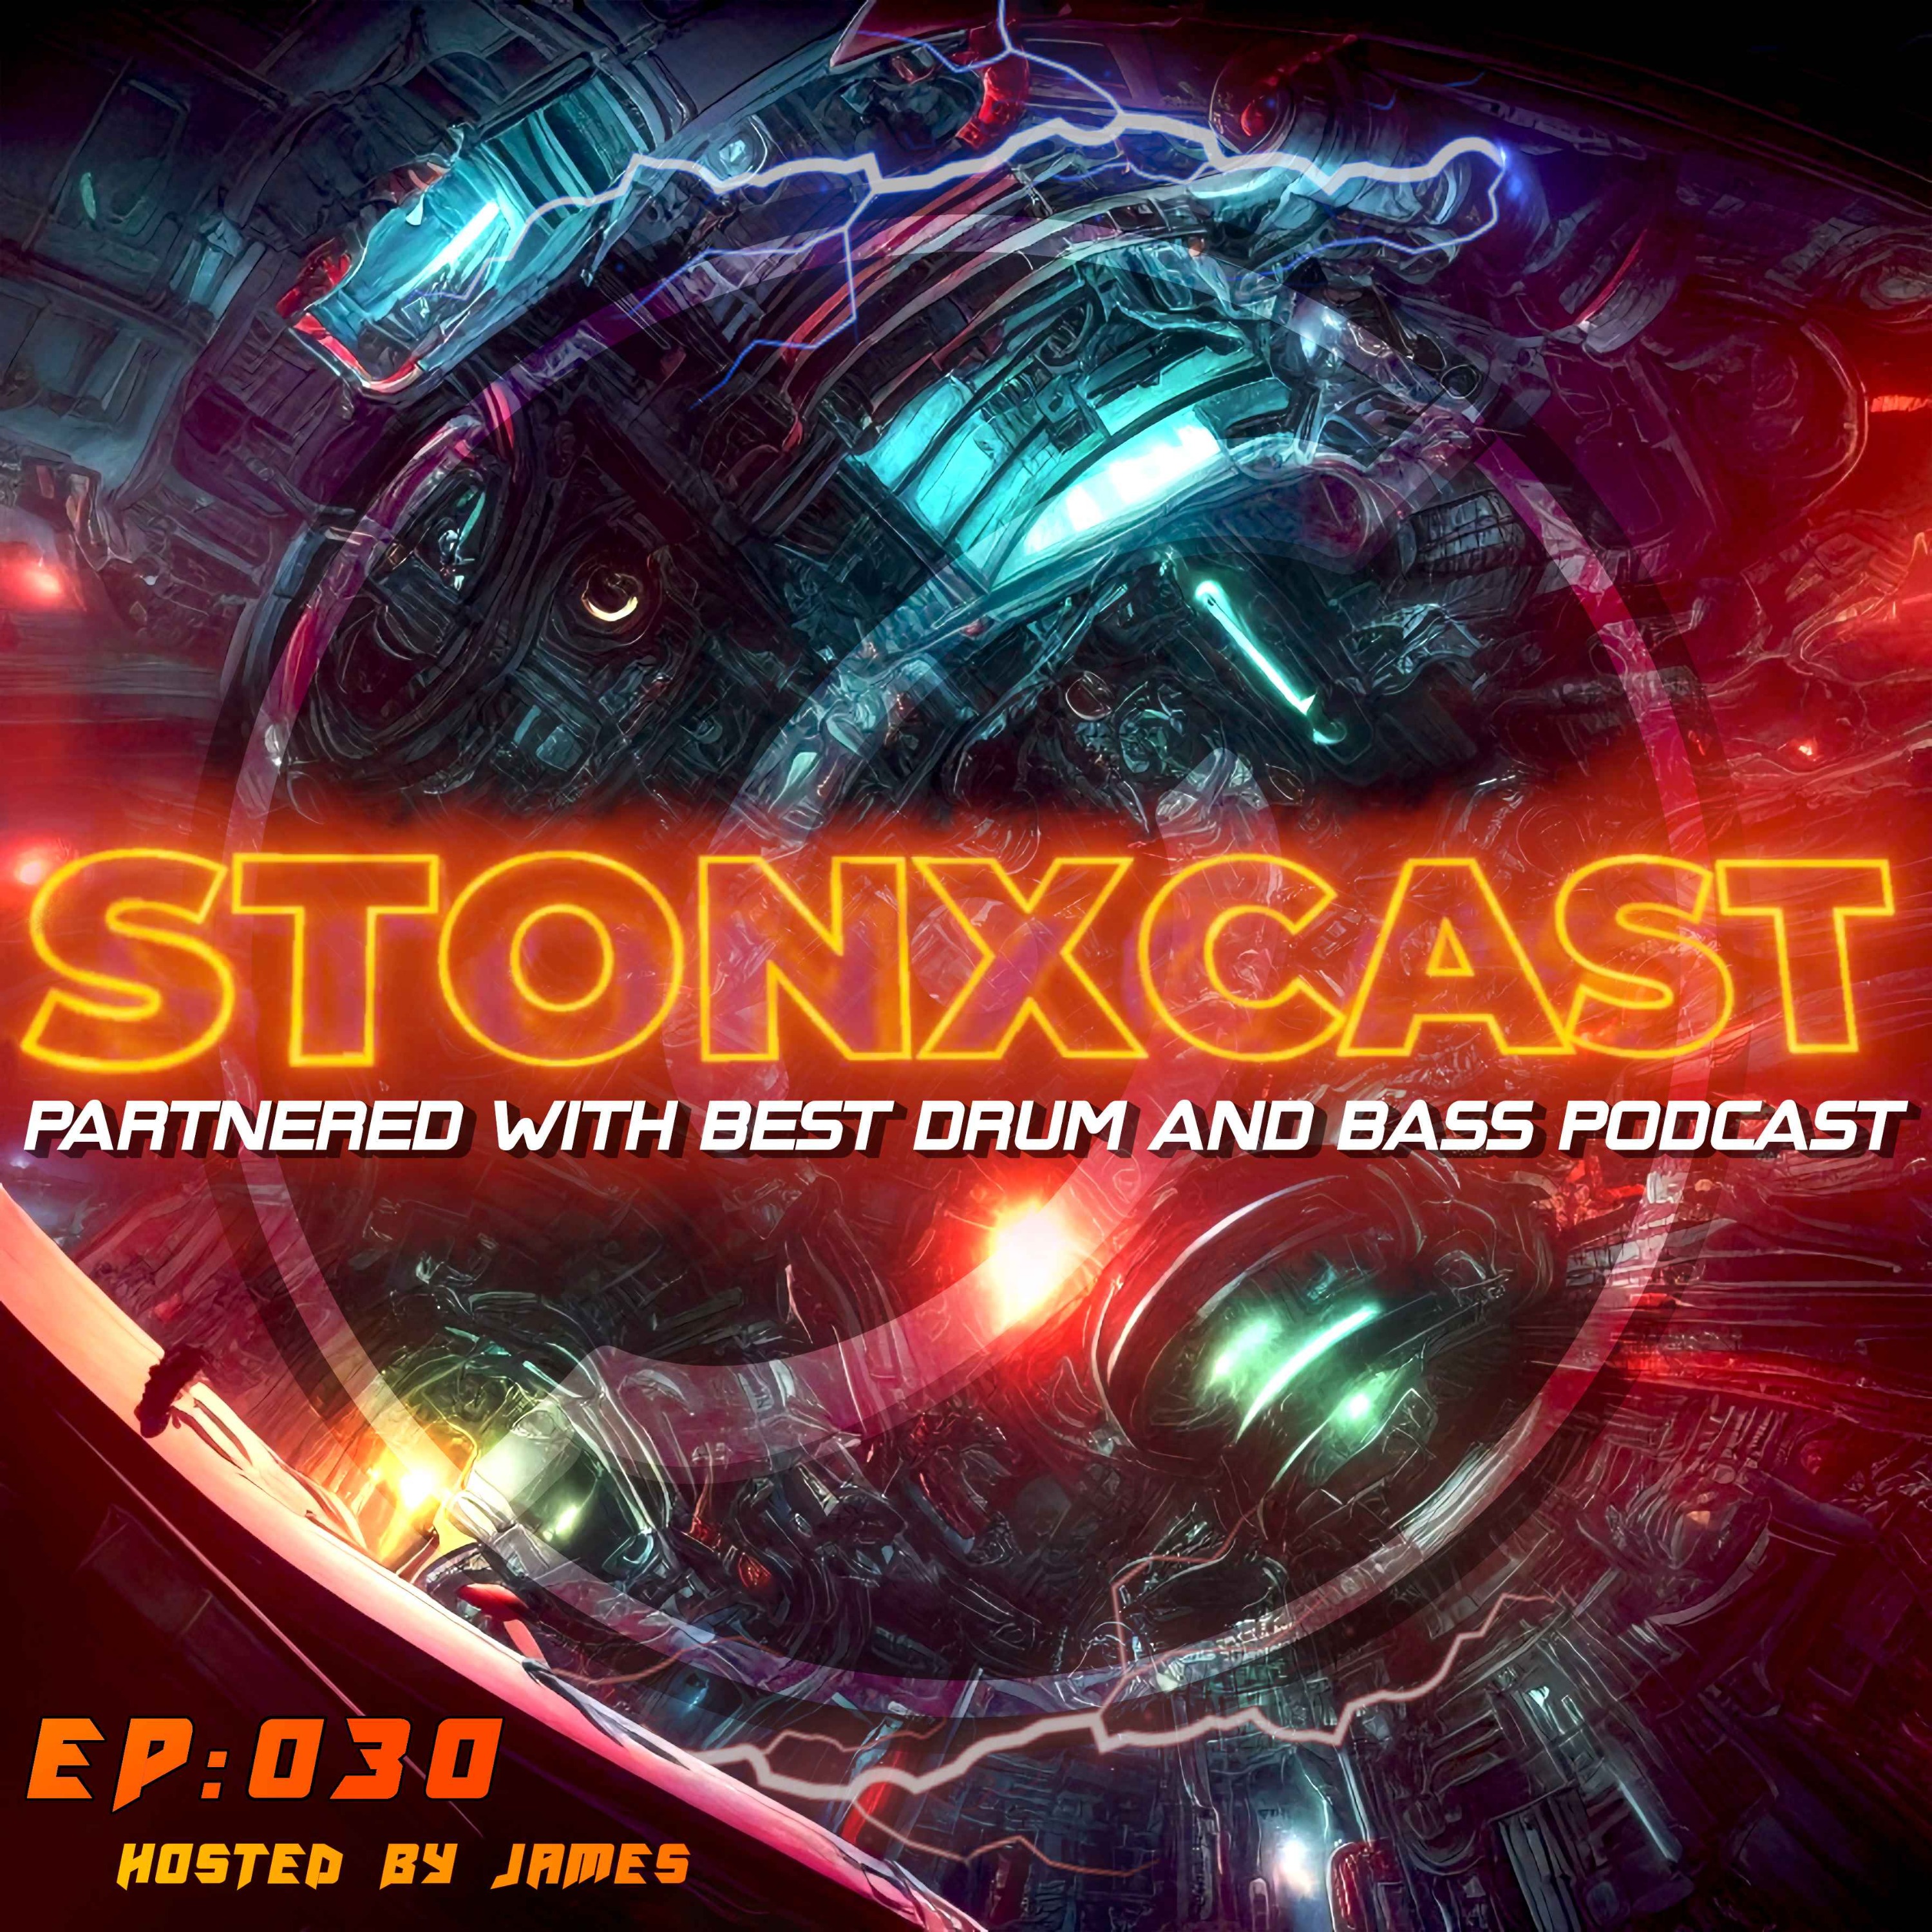  Stonxcast EP:030 - Hosted by James Artwork